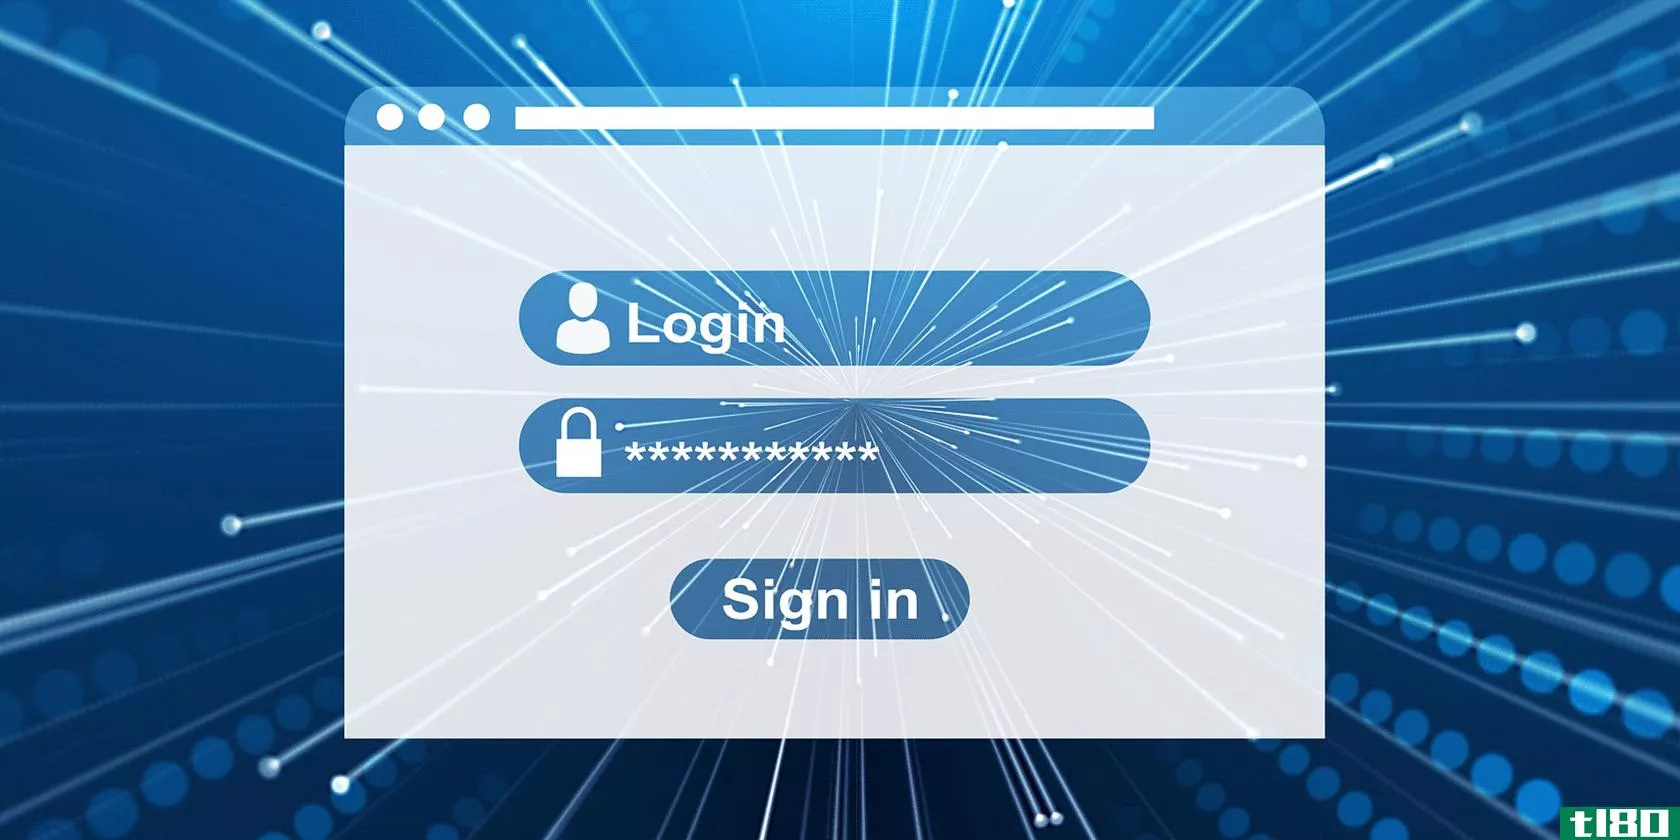 How to use Google Authenticator on Windows 10